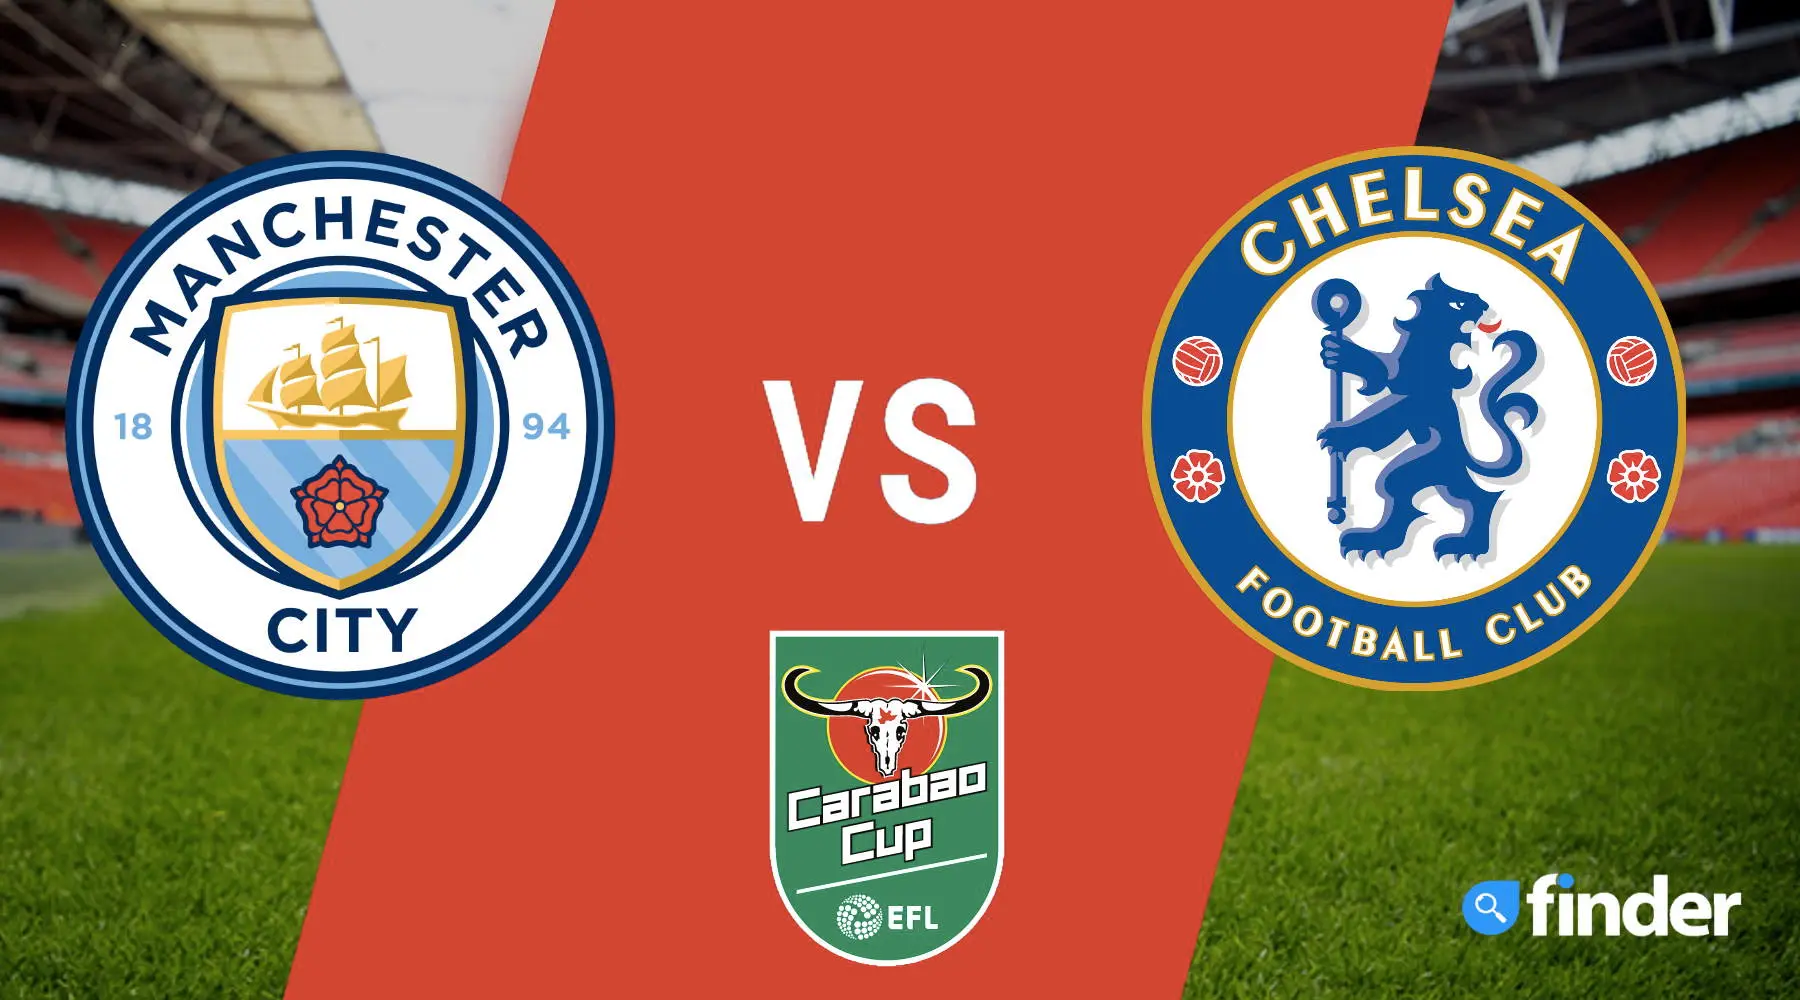 Man City vs Chelsea How to watch Carabao Cup match live and free